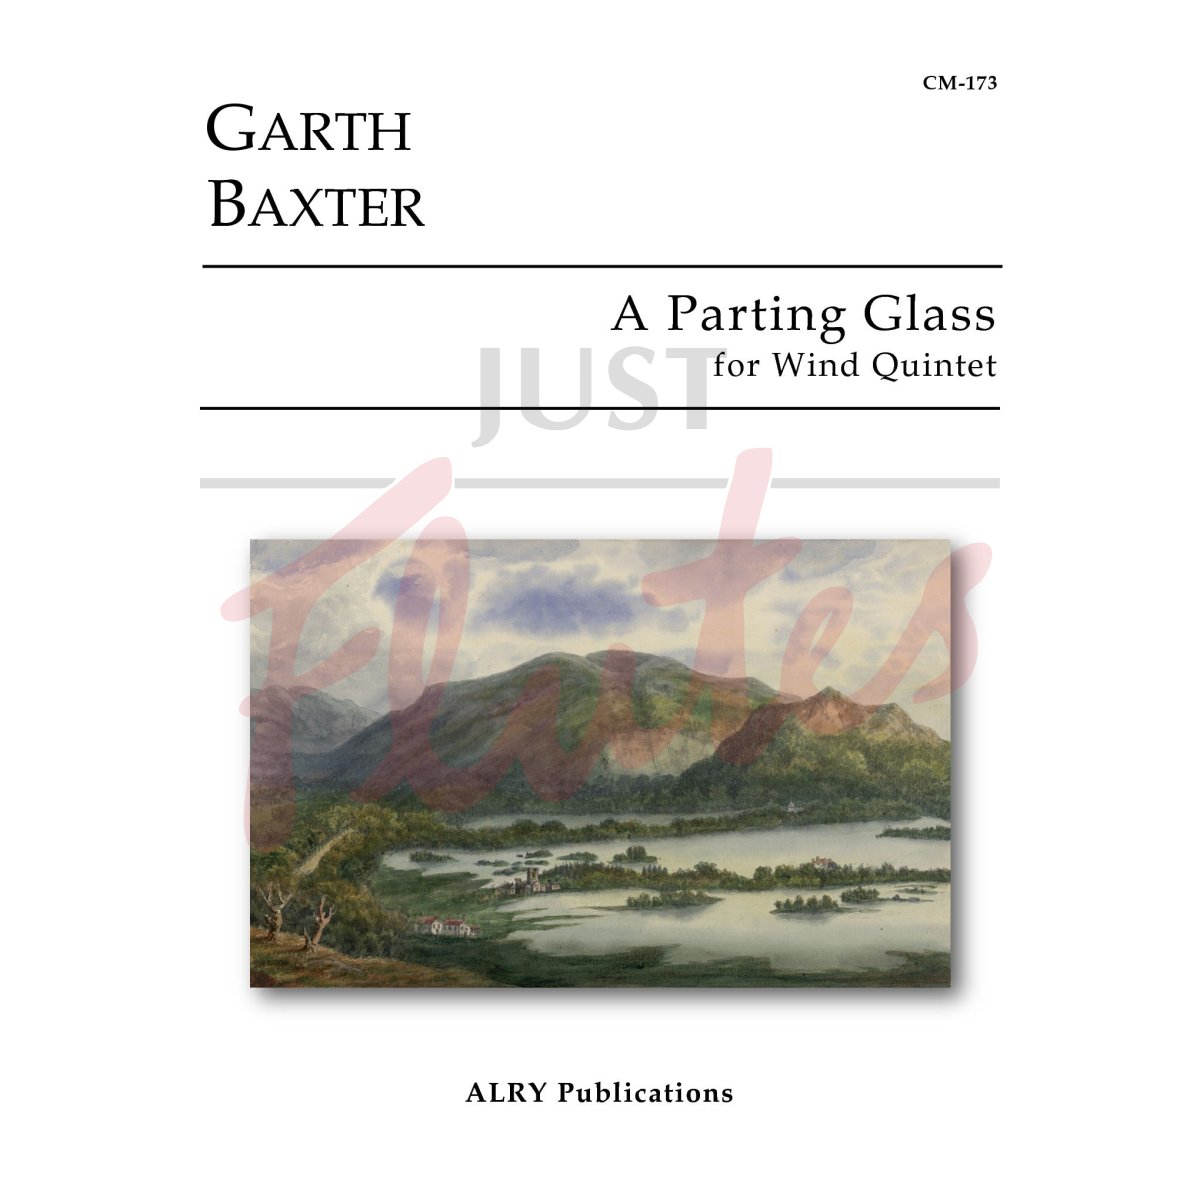 A Parting Glass for Wind Quintet